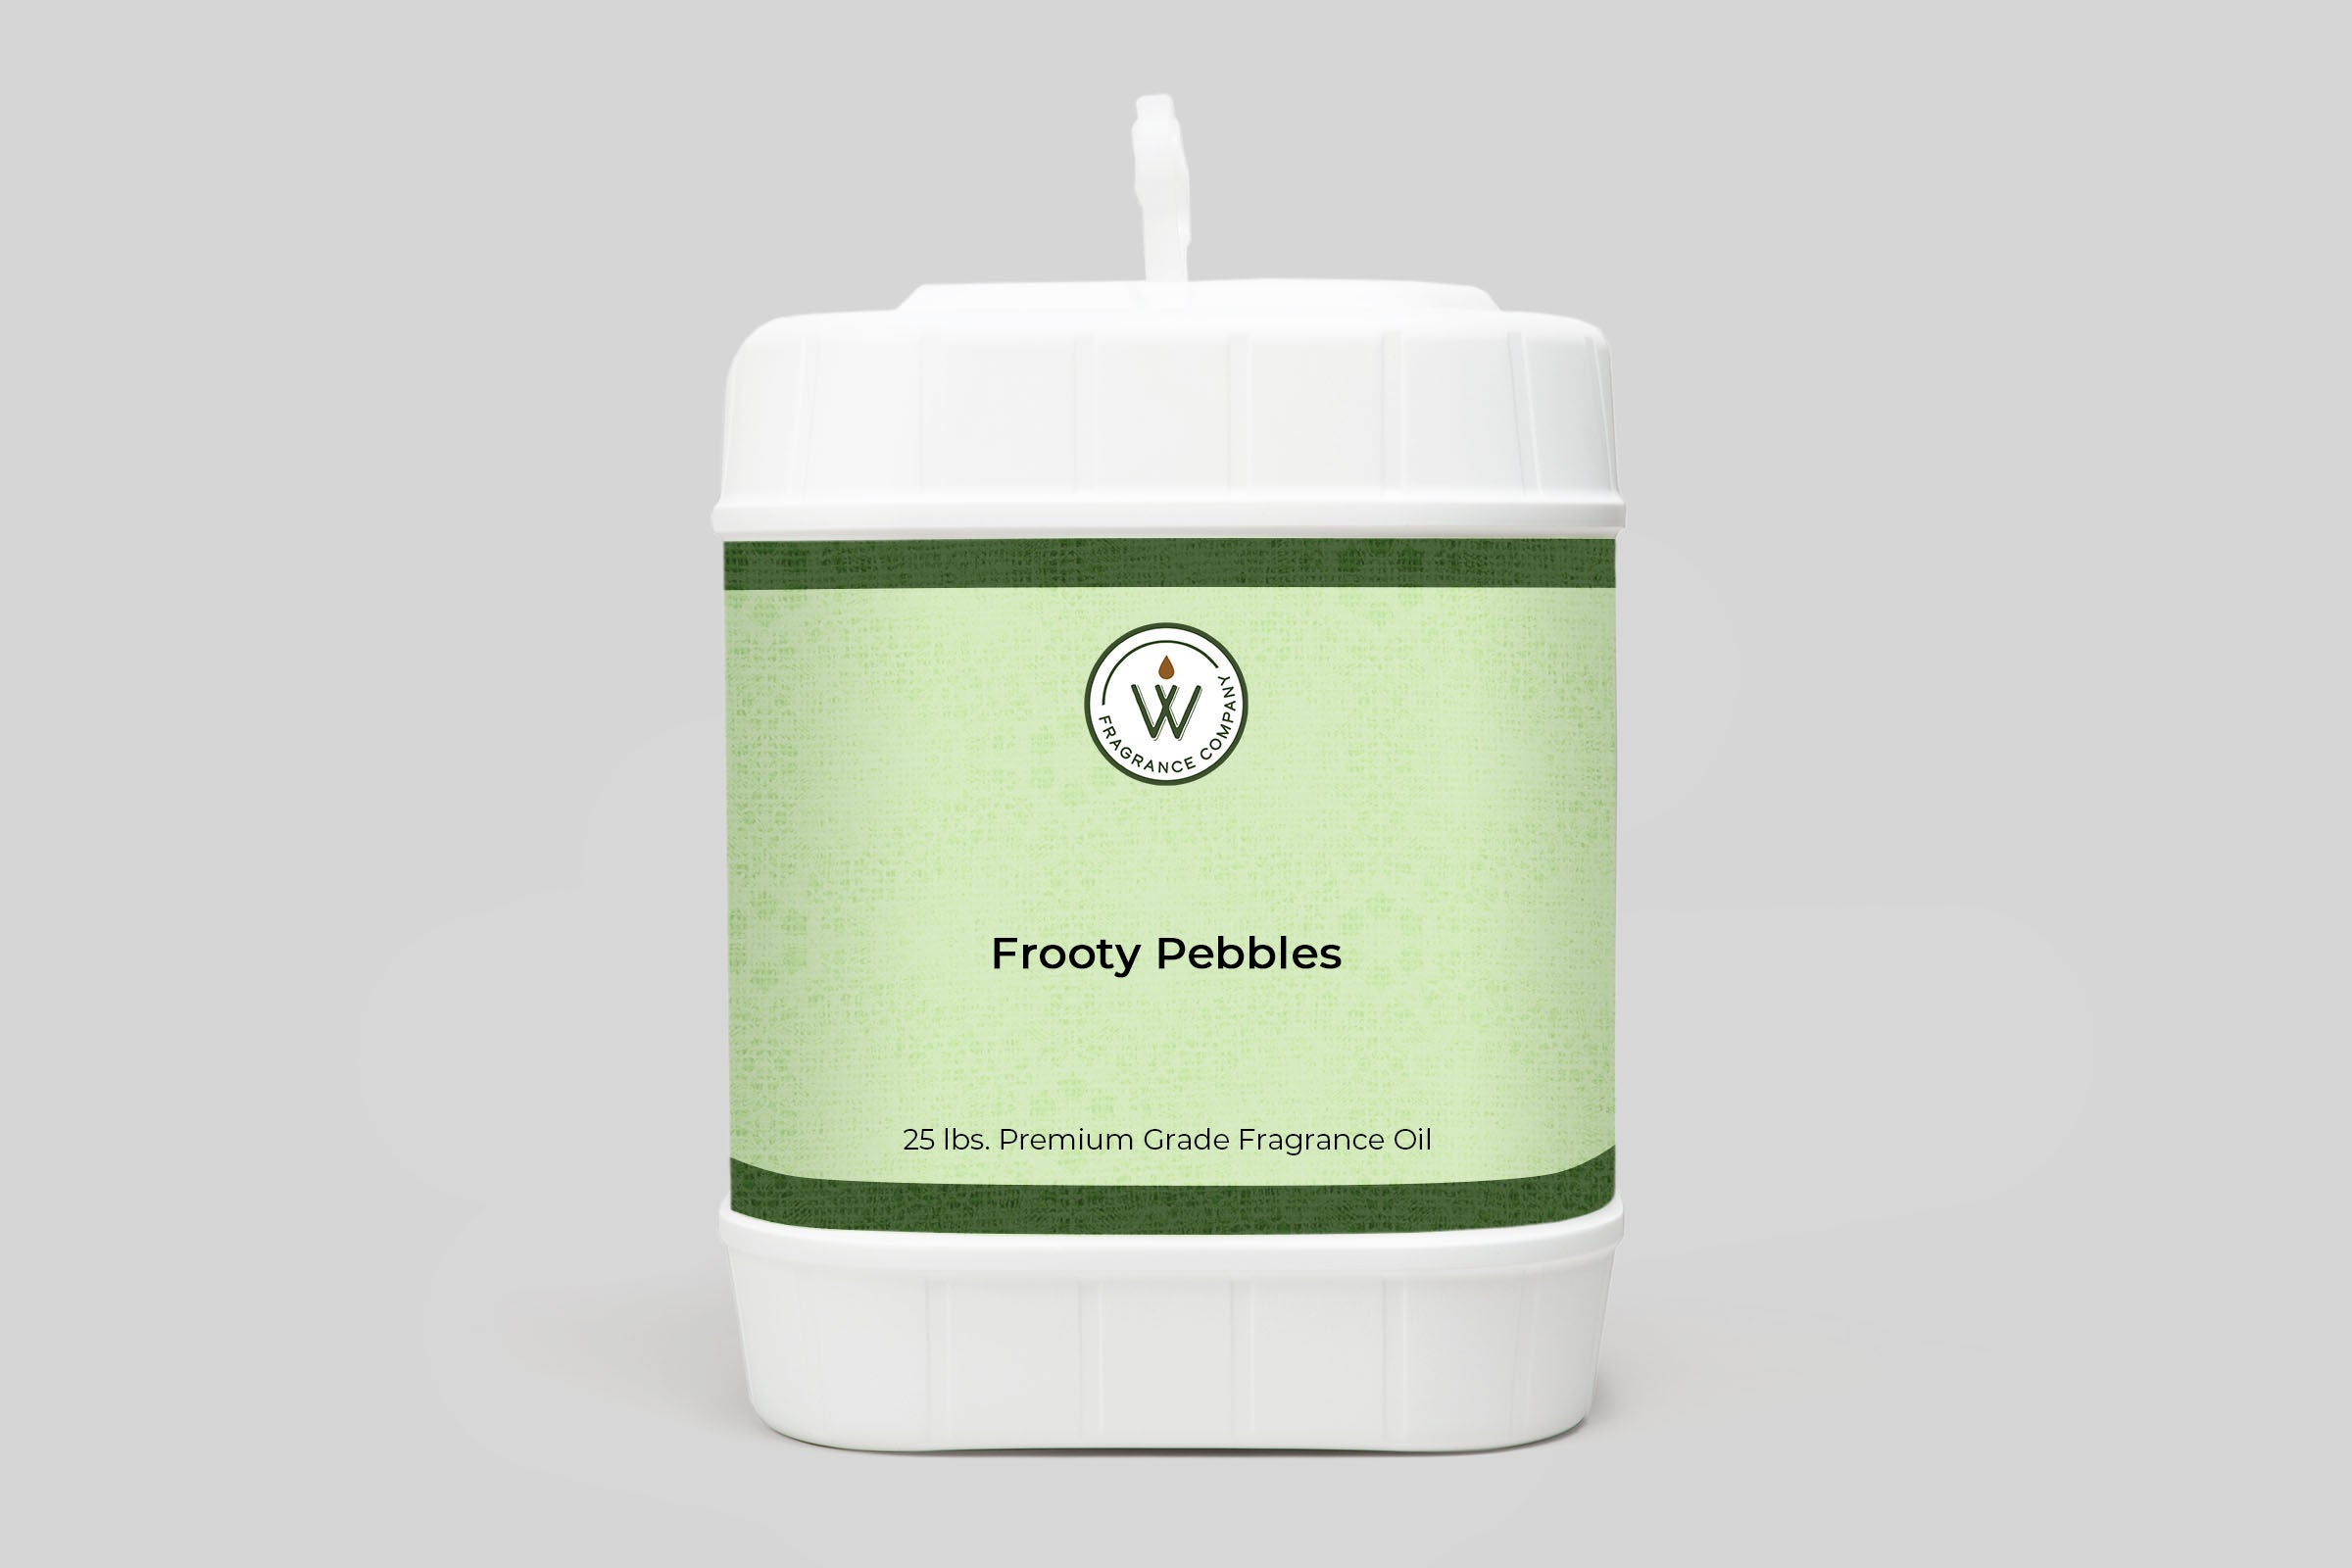 Frooty Pebbles Fragrance Oil